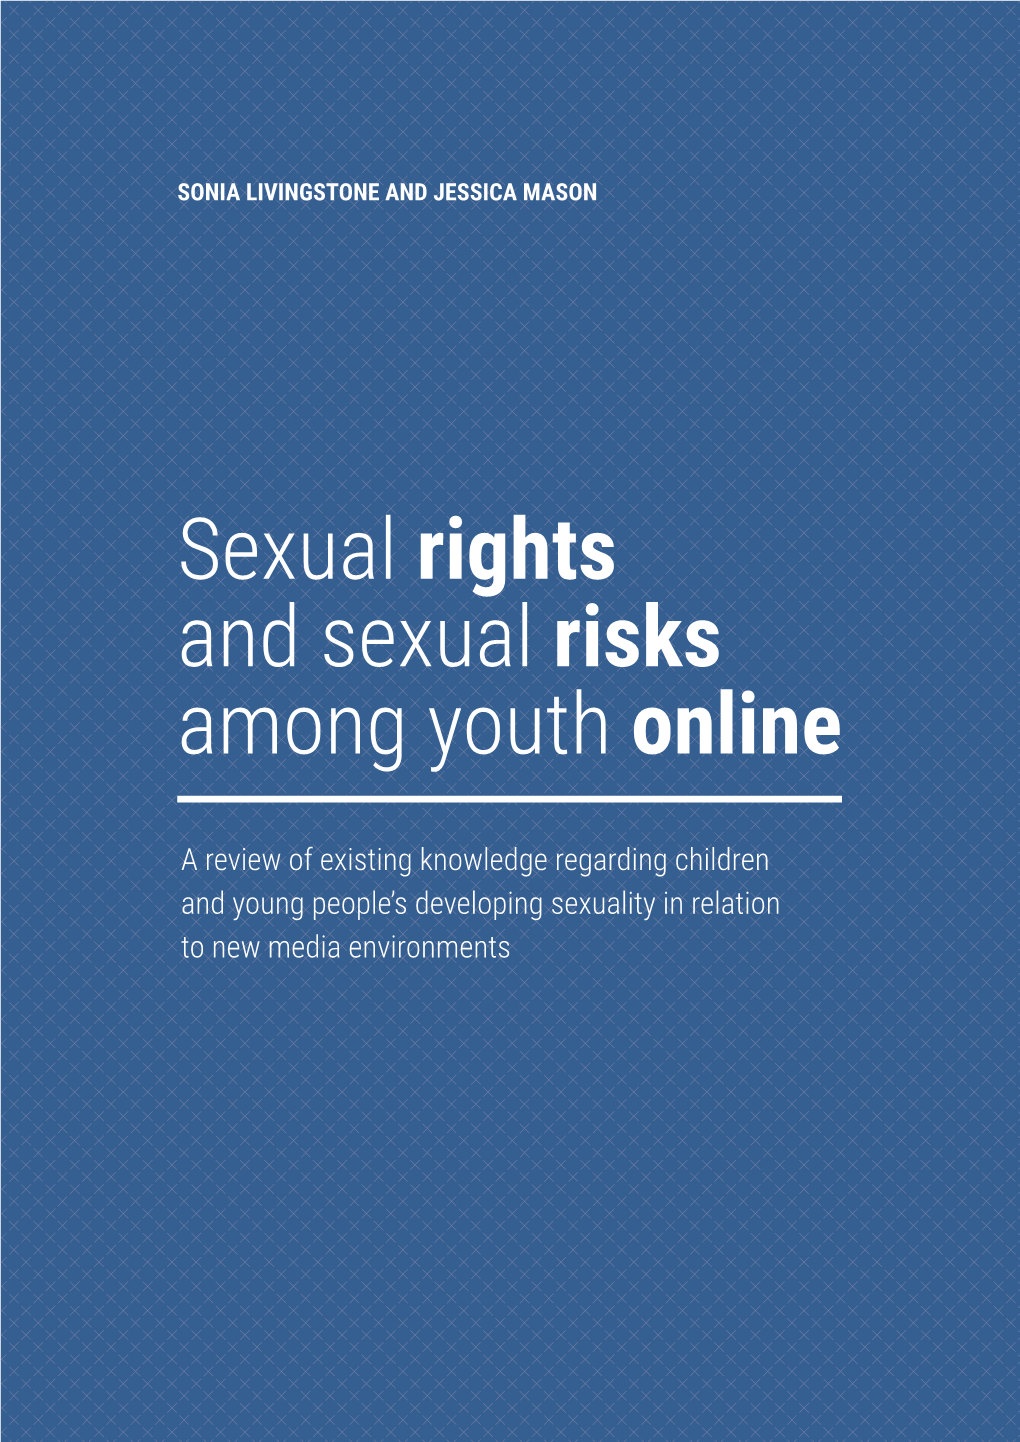 Sexual Rights and Risks Among Youth Online